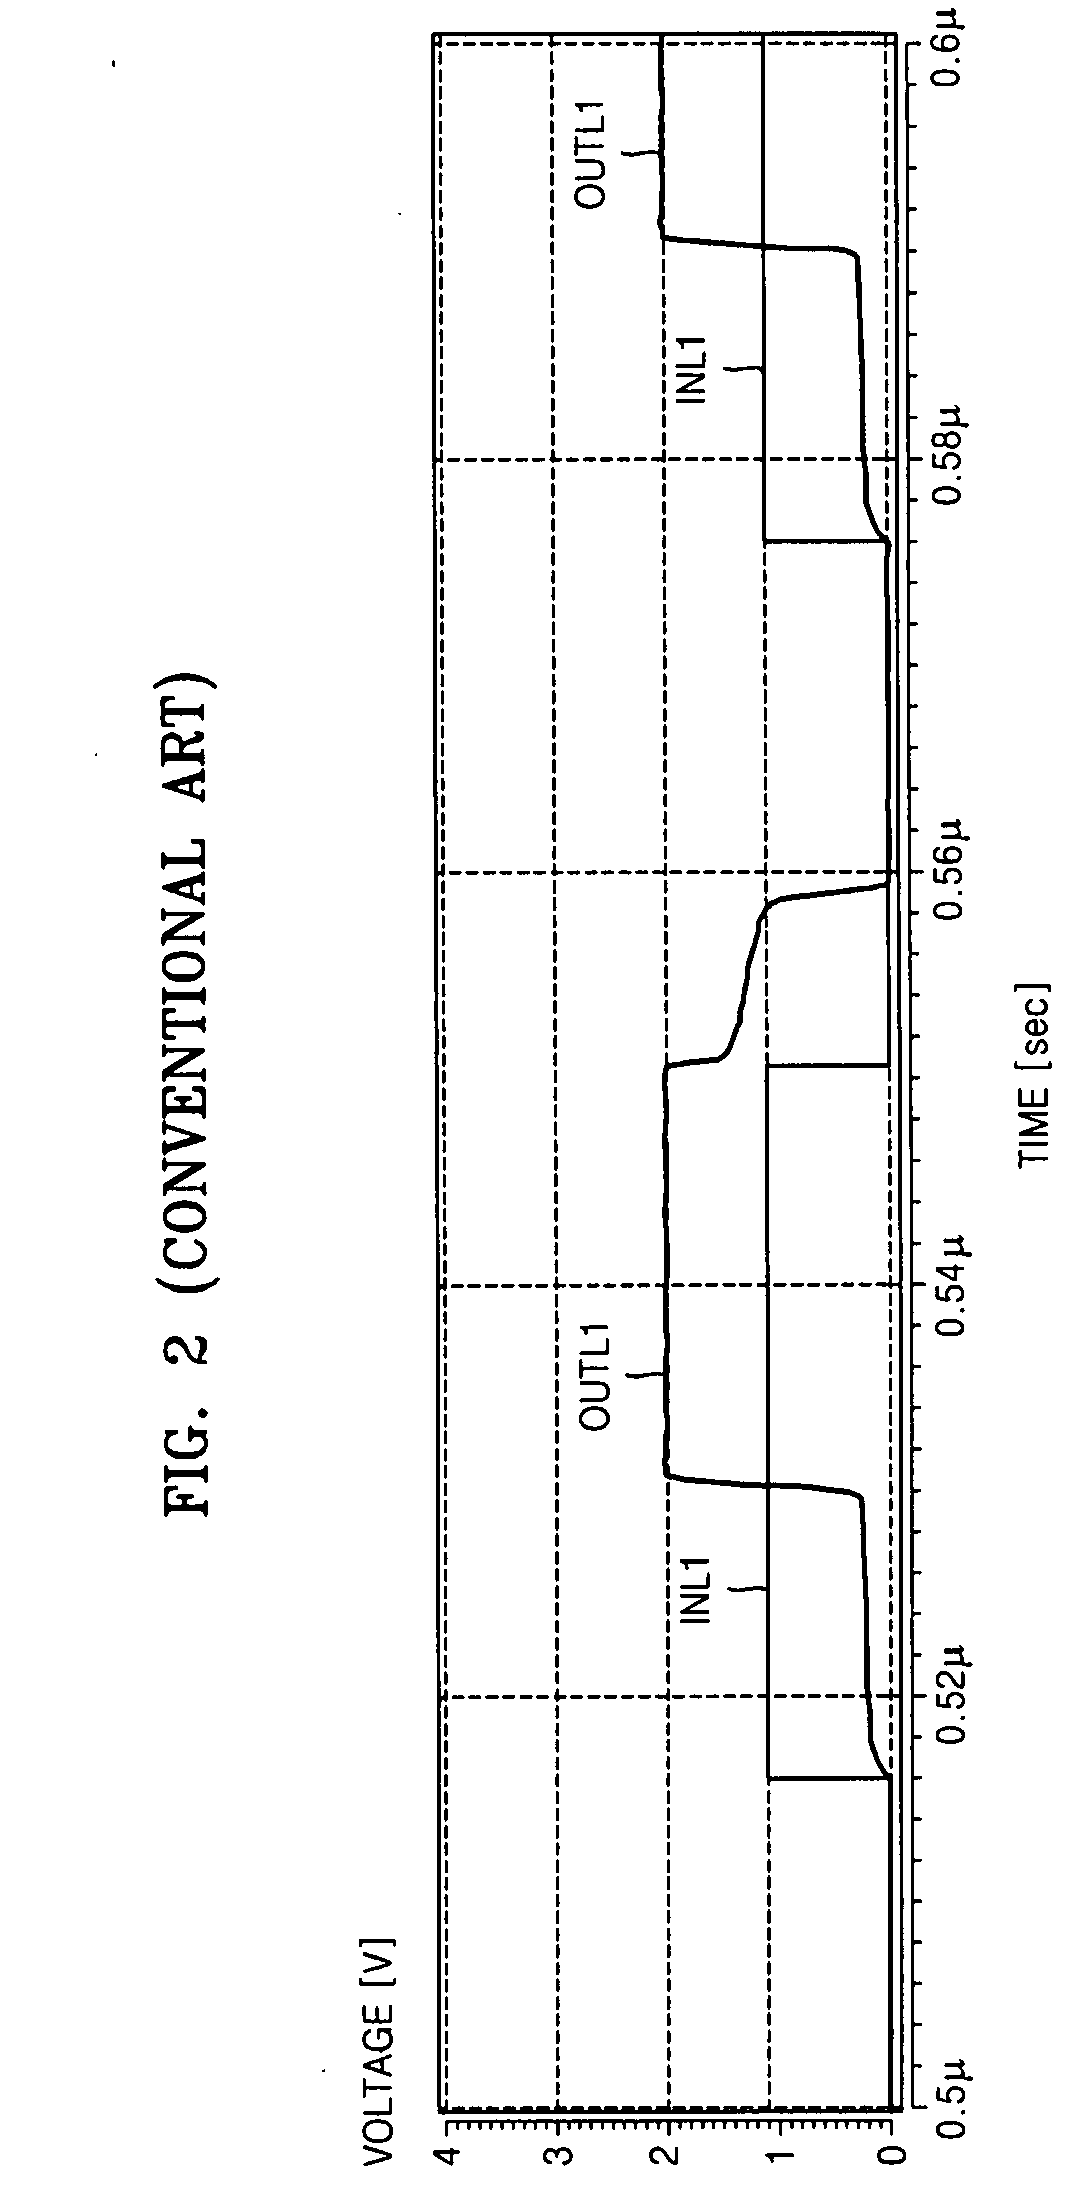 Level shifter circuit and method thereof